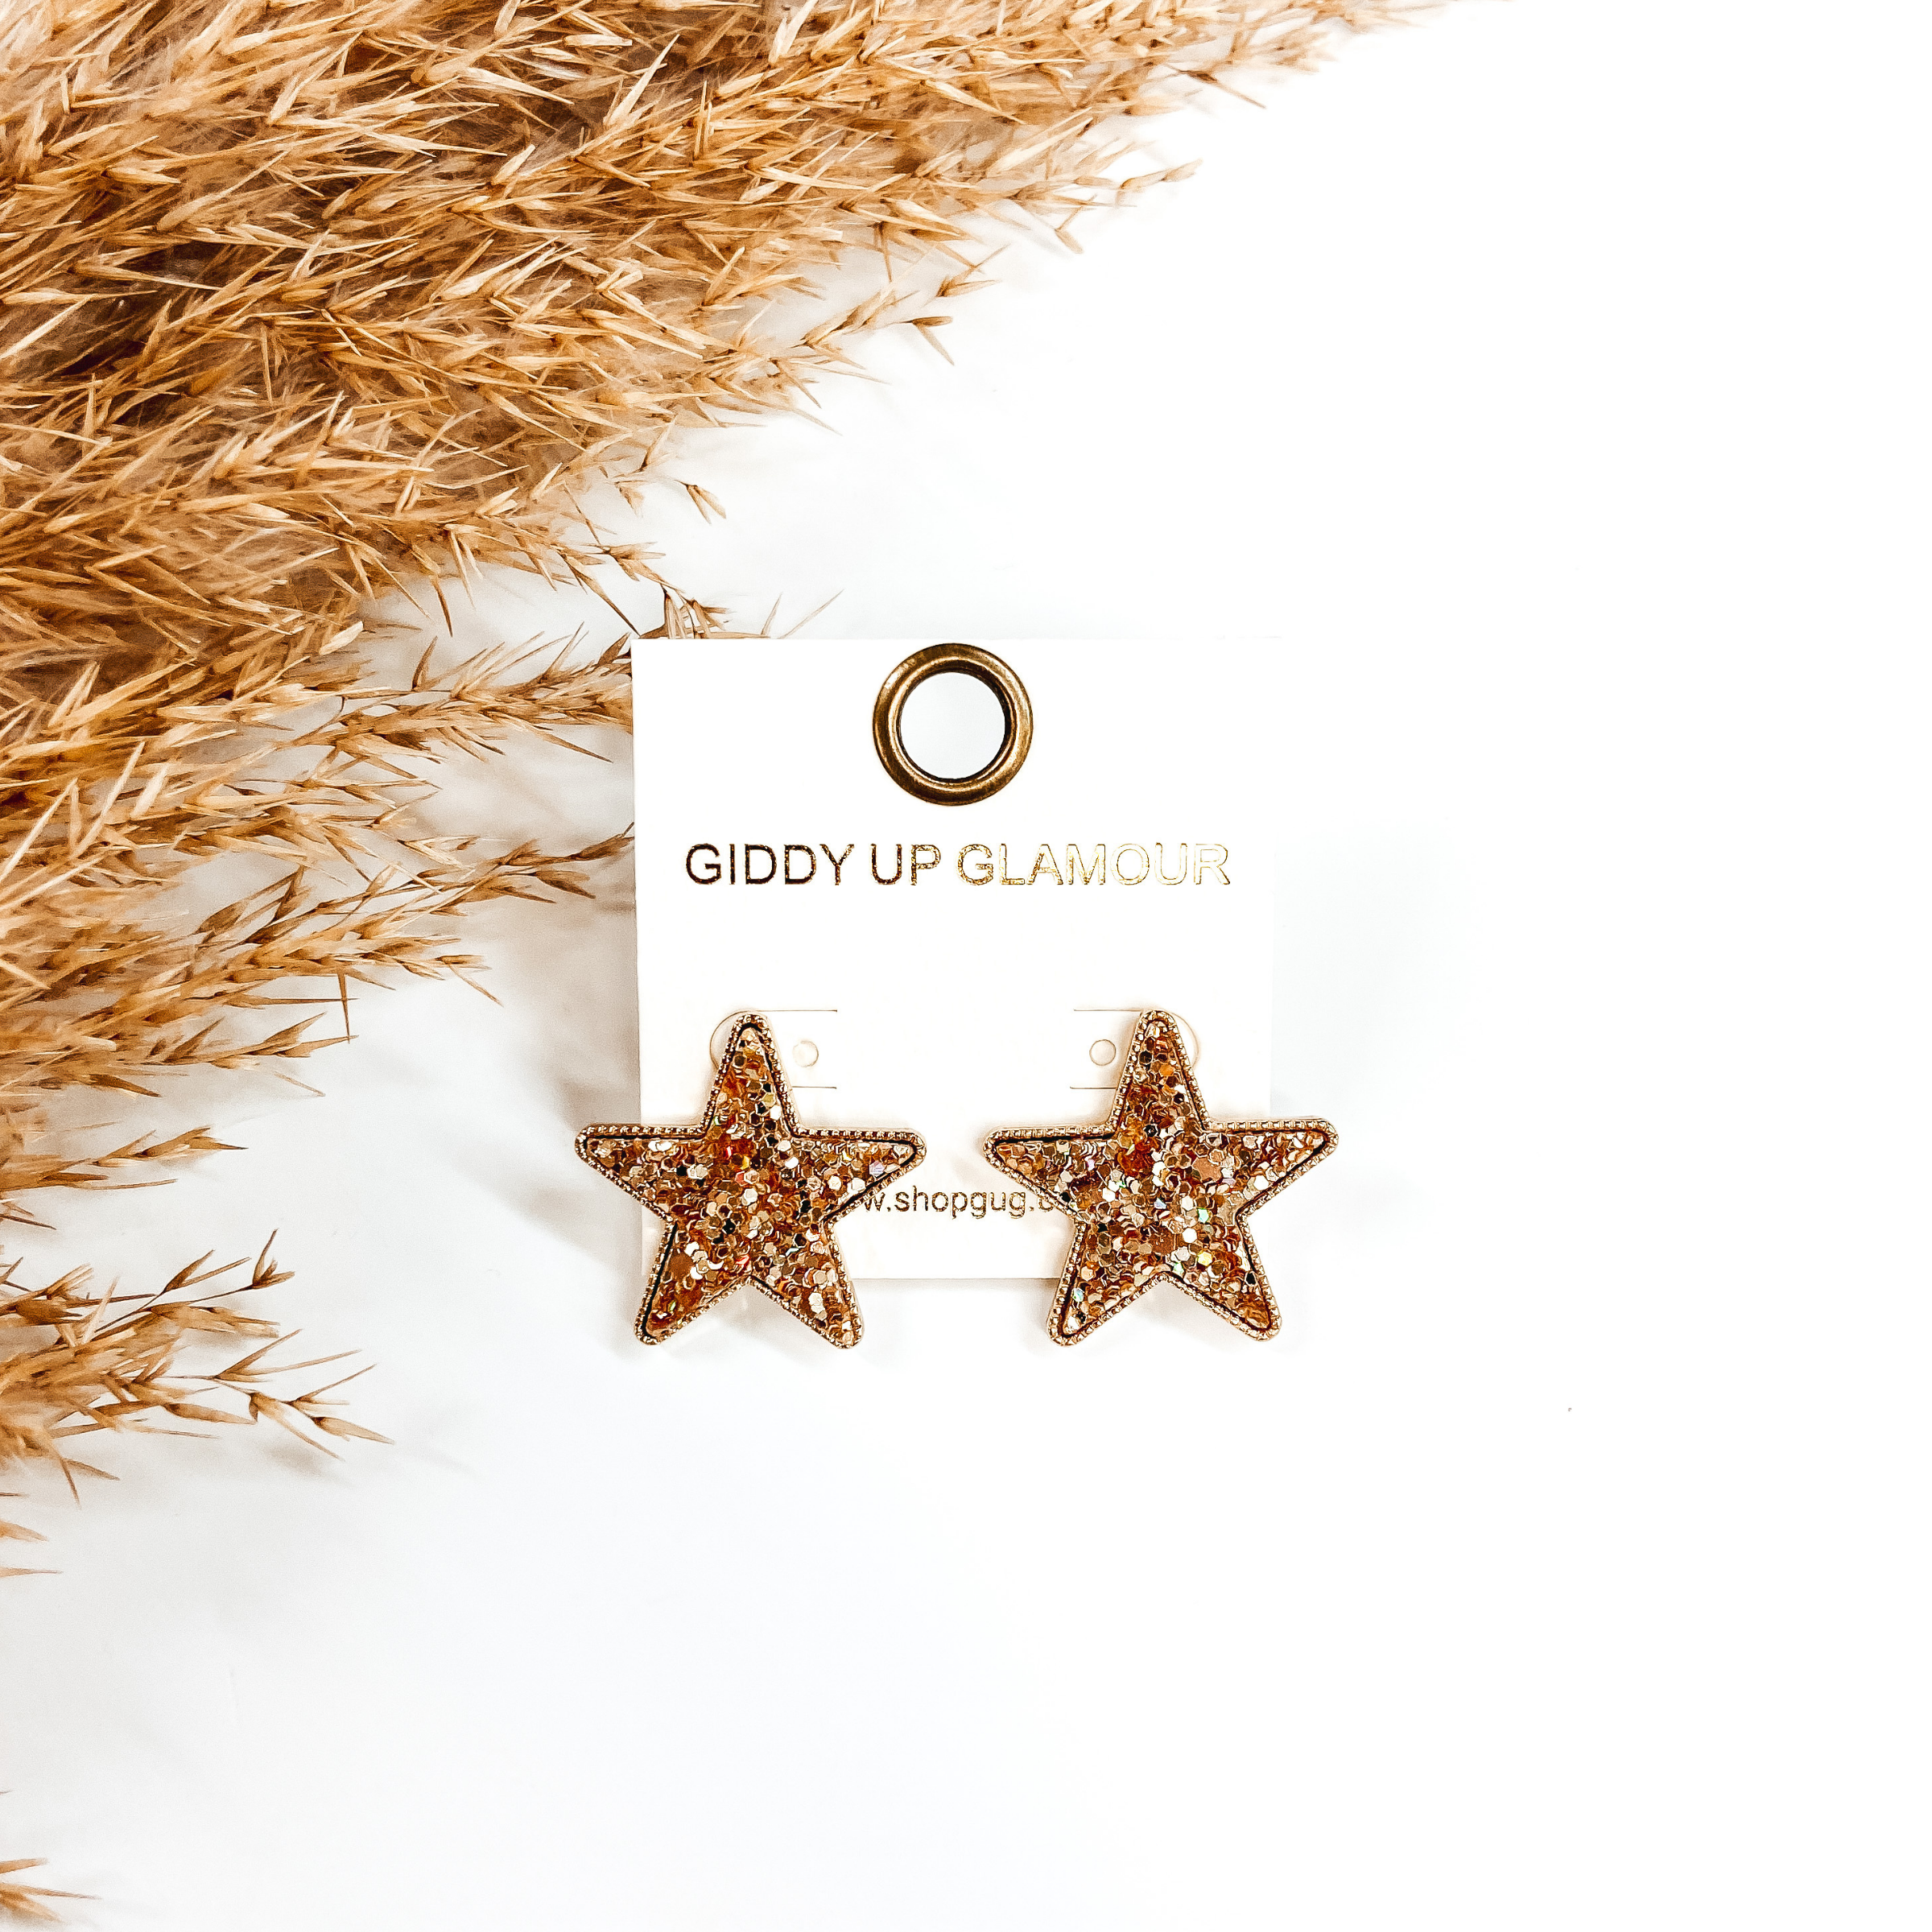 Sparkle in Her Eyes Druzy Star Post Earrings in Gold - Giddy Up Glamour Boutique